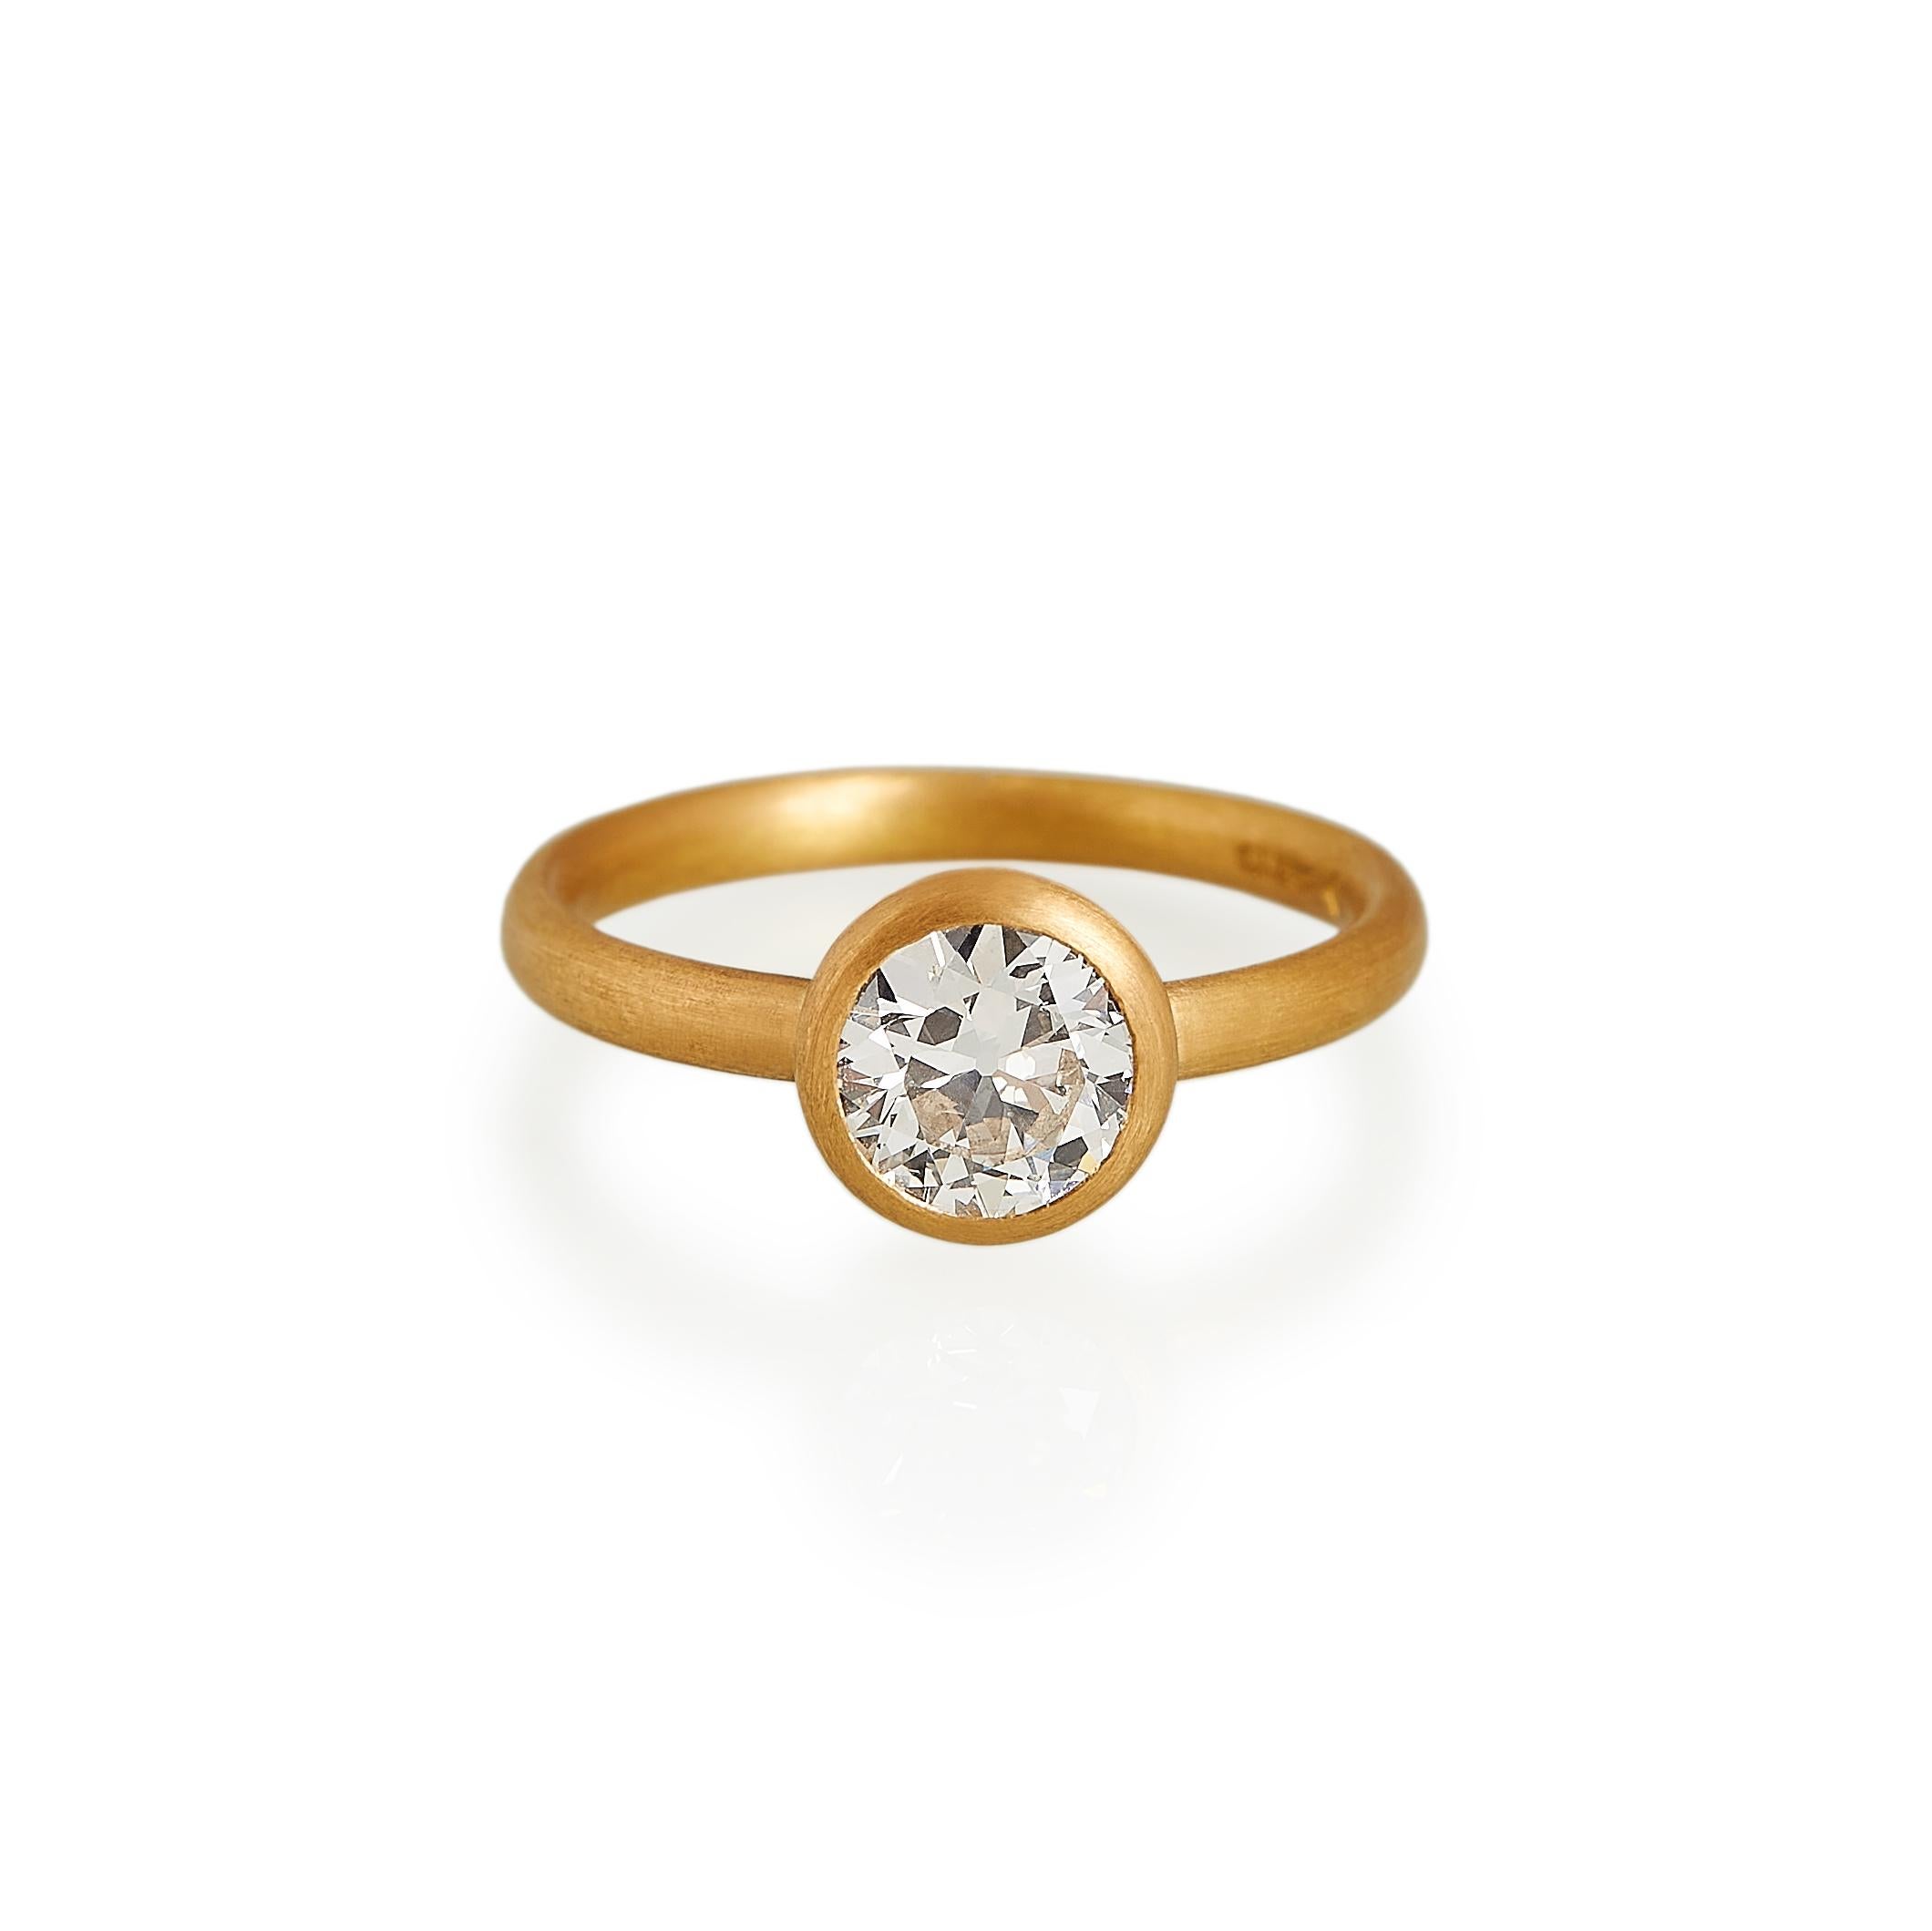 Old European brilliant cut diamond ring. These beautiful & unique antique diamonds have a nature of their own, with irregular shapes, unusual dimensions and uneven facets.
Ref: R20002

GIA certificated 1.40cts circular brilliant cut diamond  Clarity